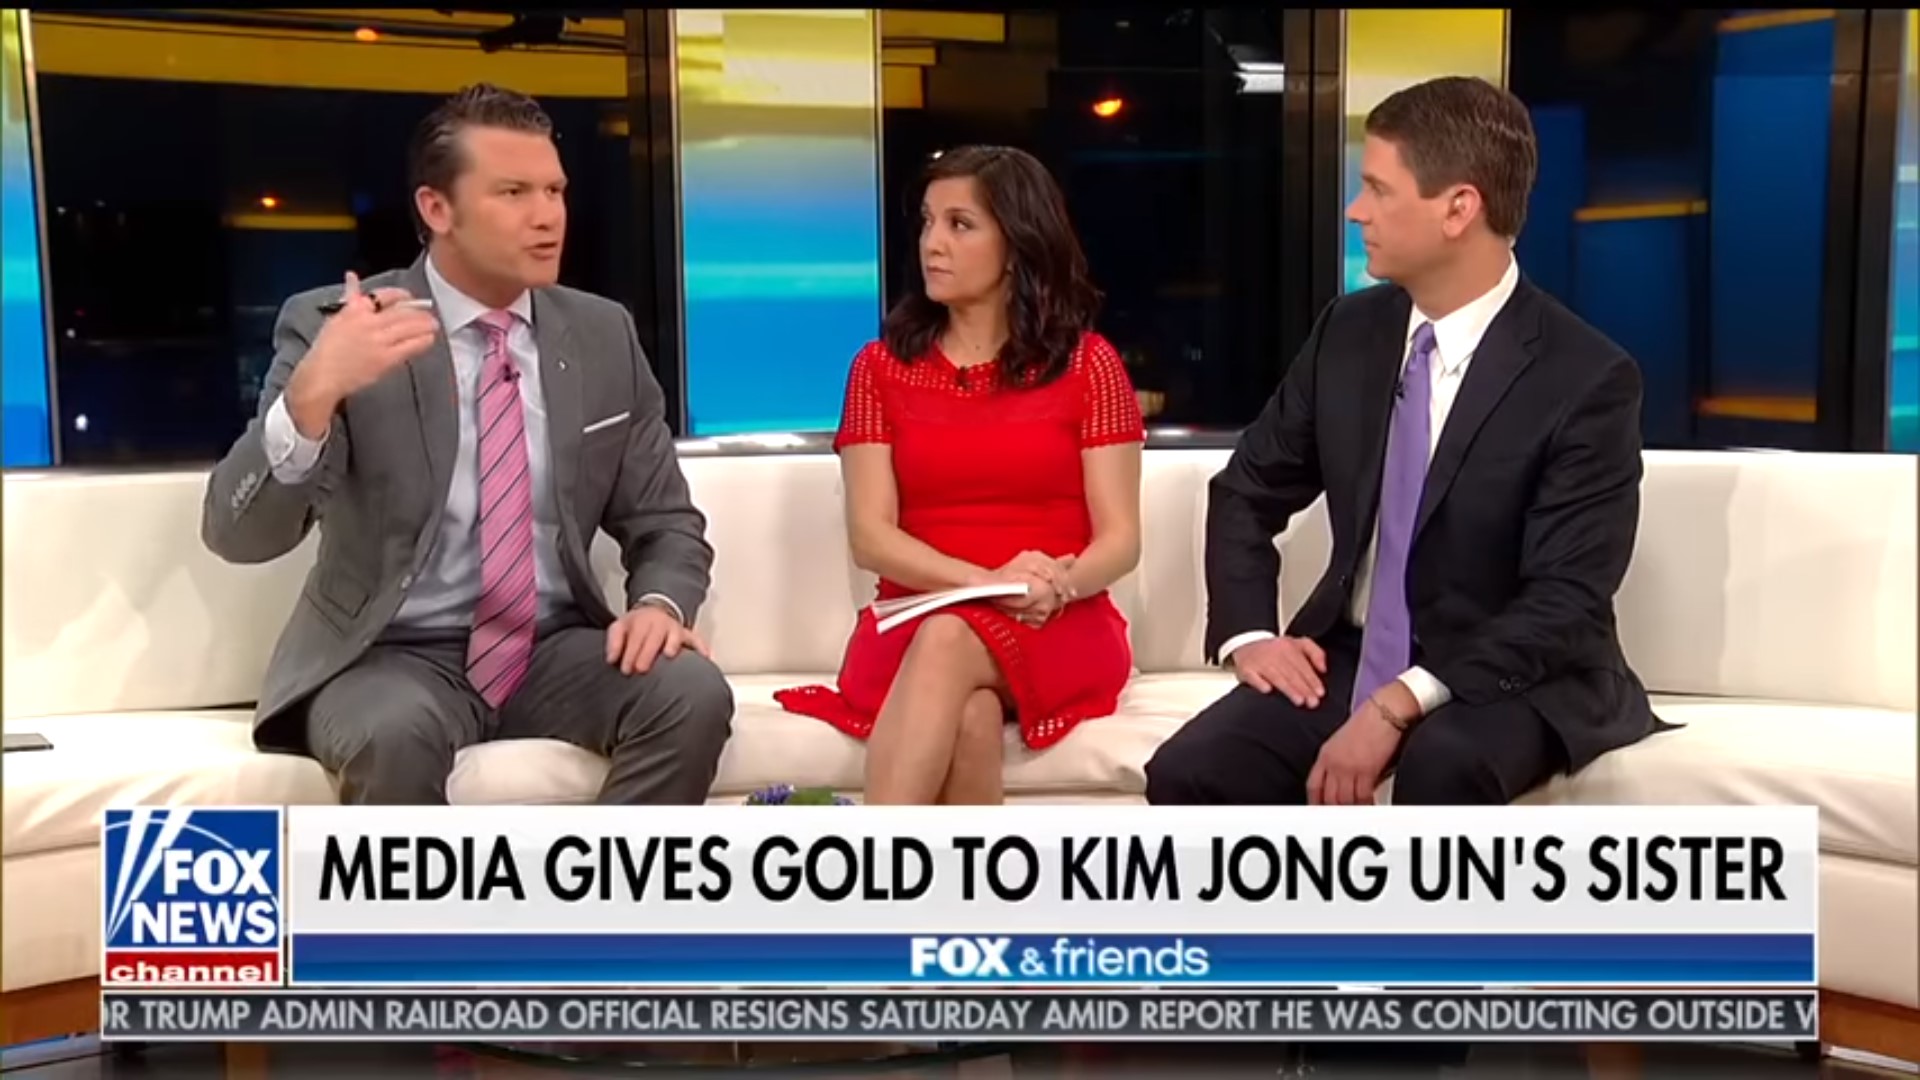 Remember When Pete Hegseth Flipped Out Over Media’s Coverage Of Kim Jong Un’s Sister?